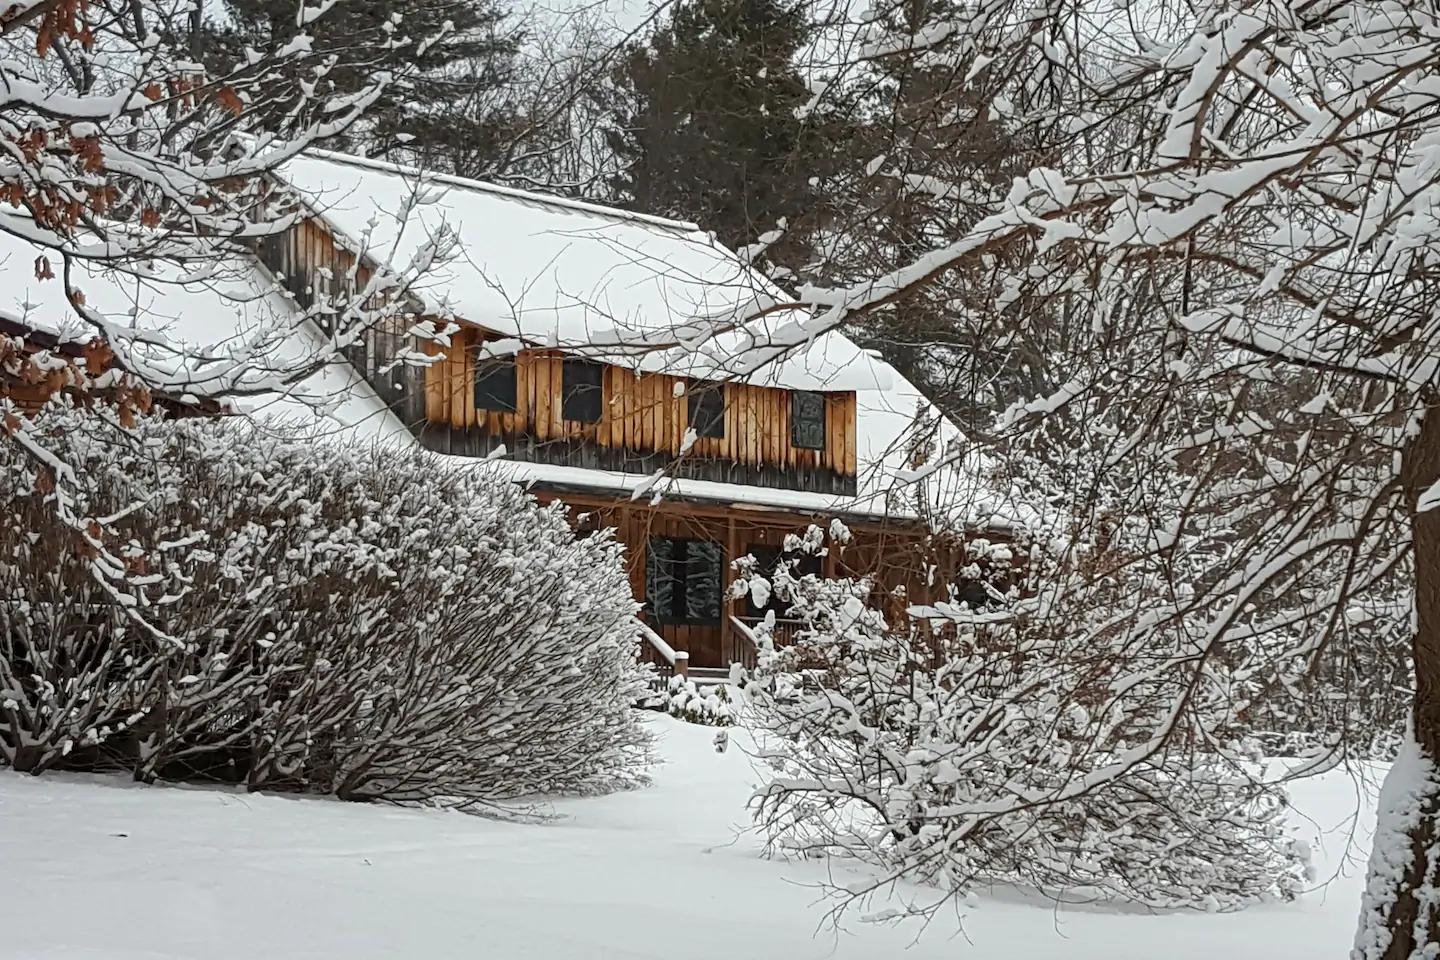 Cabin in the woods covered with snow